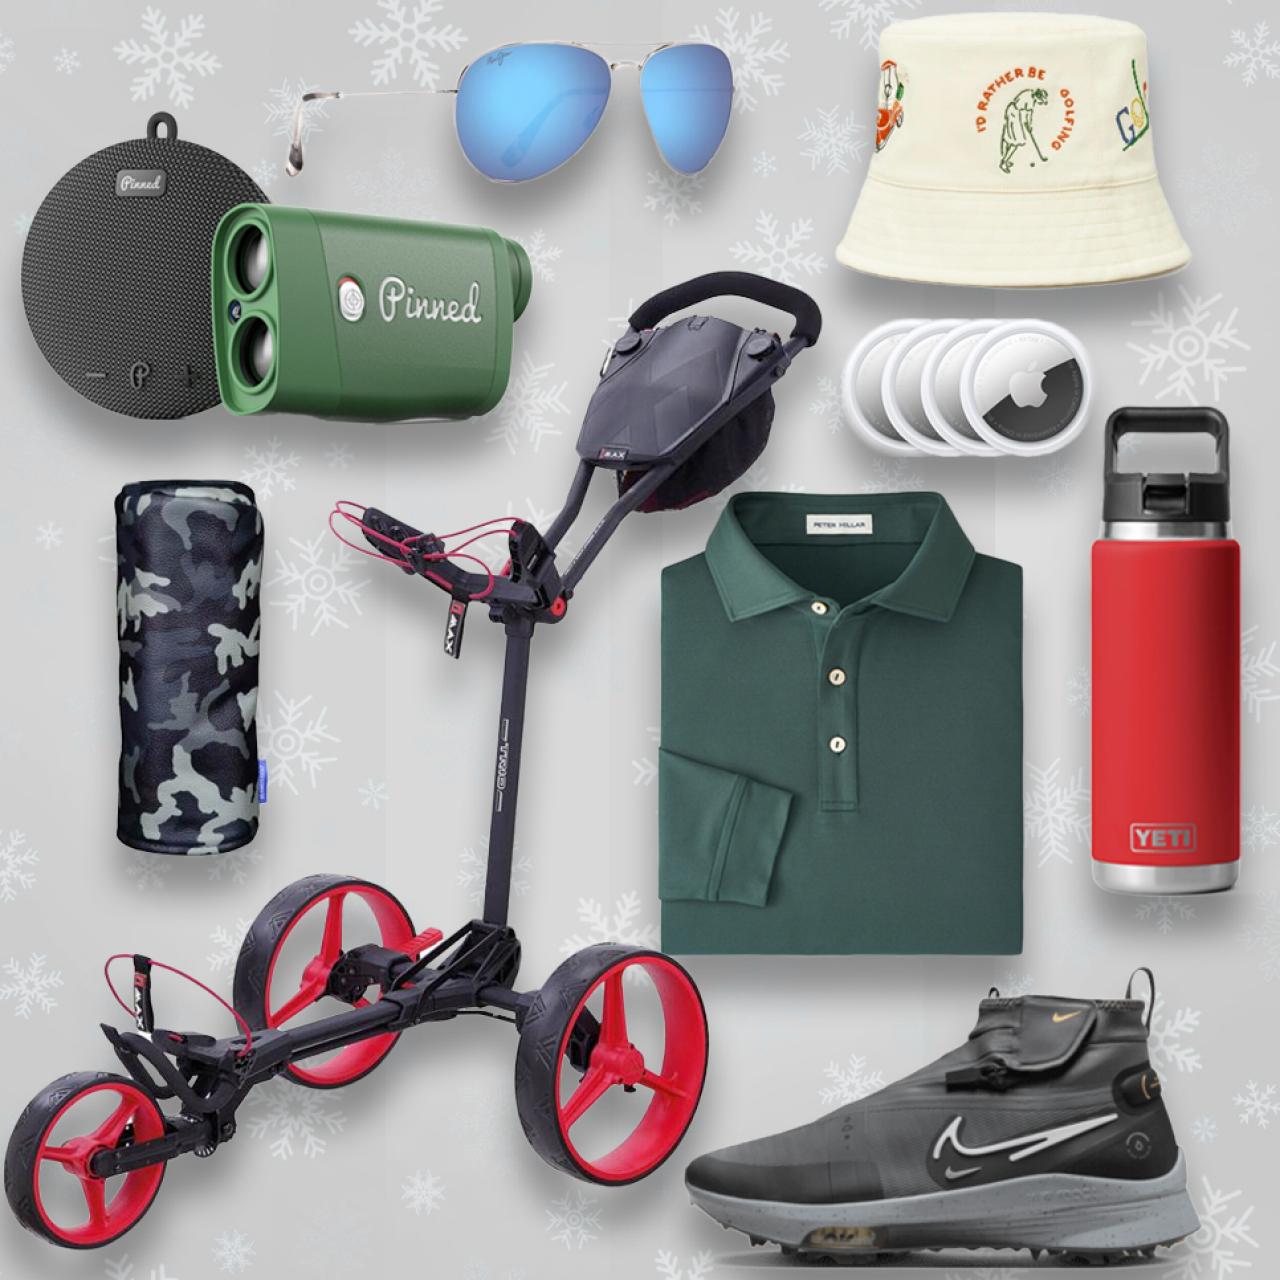 Affordable golf gifts: 17 best golf gifts under $50